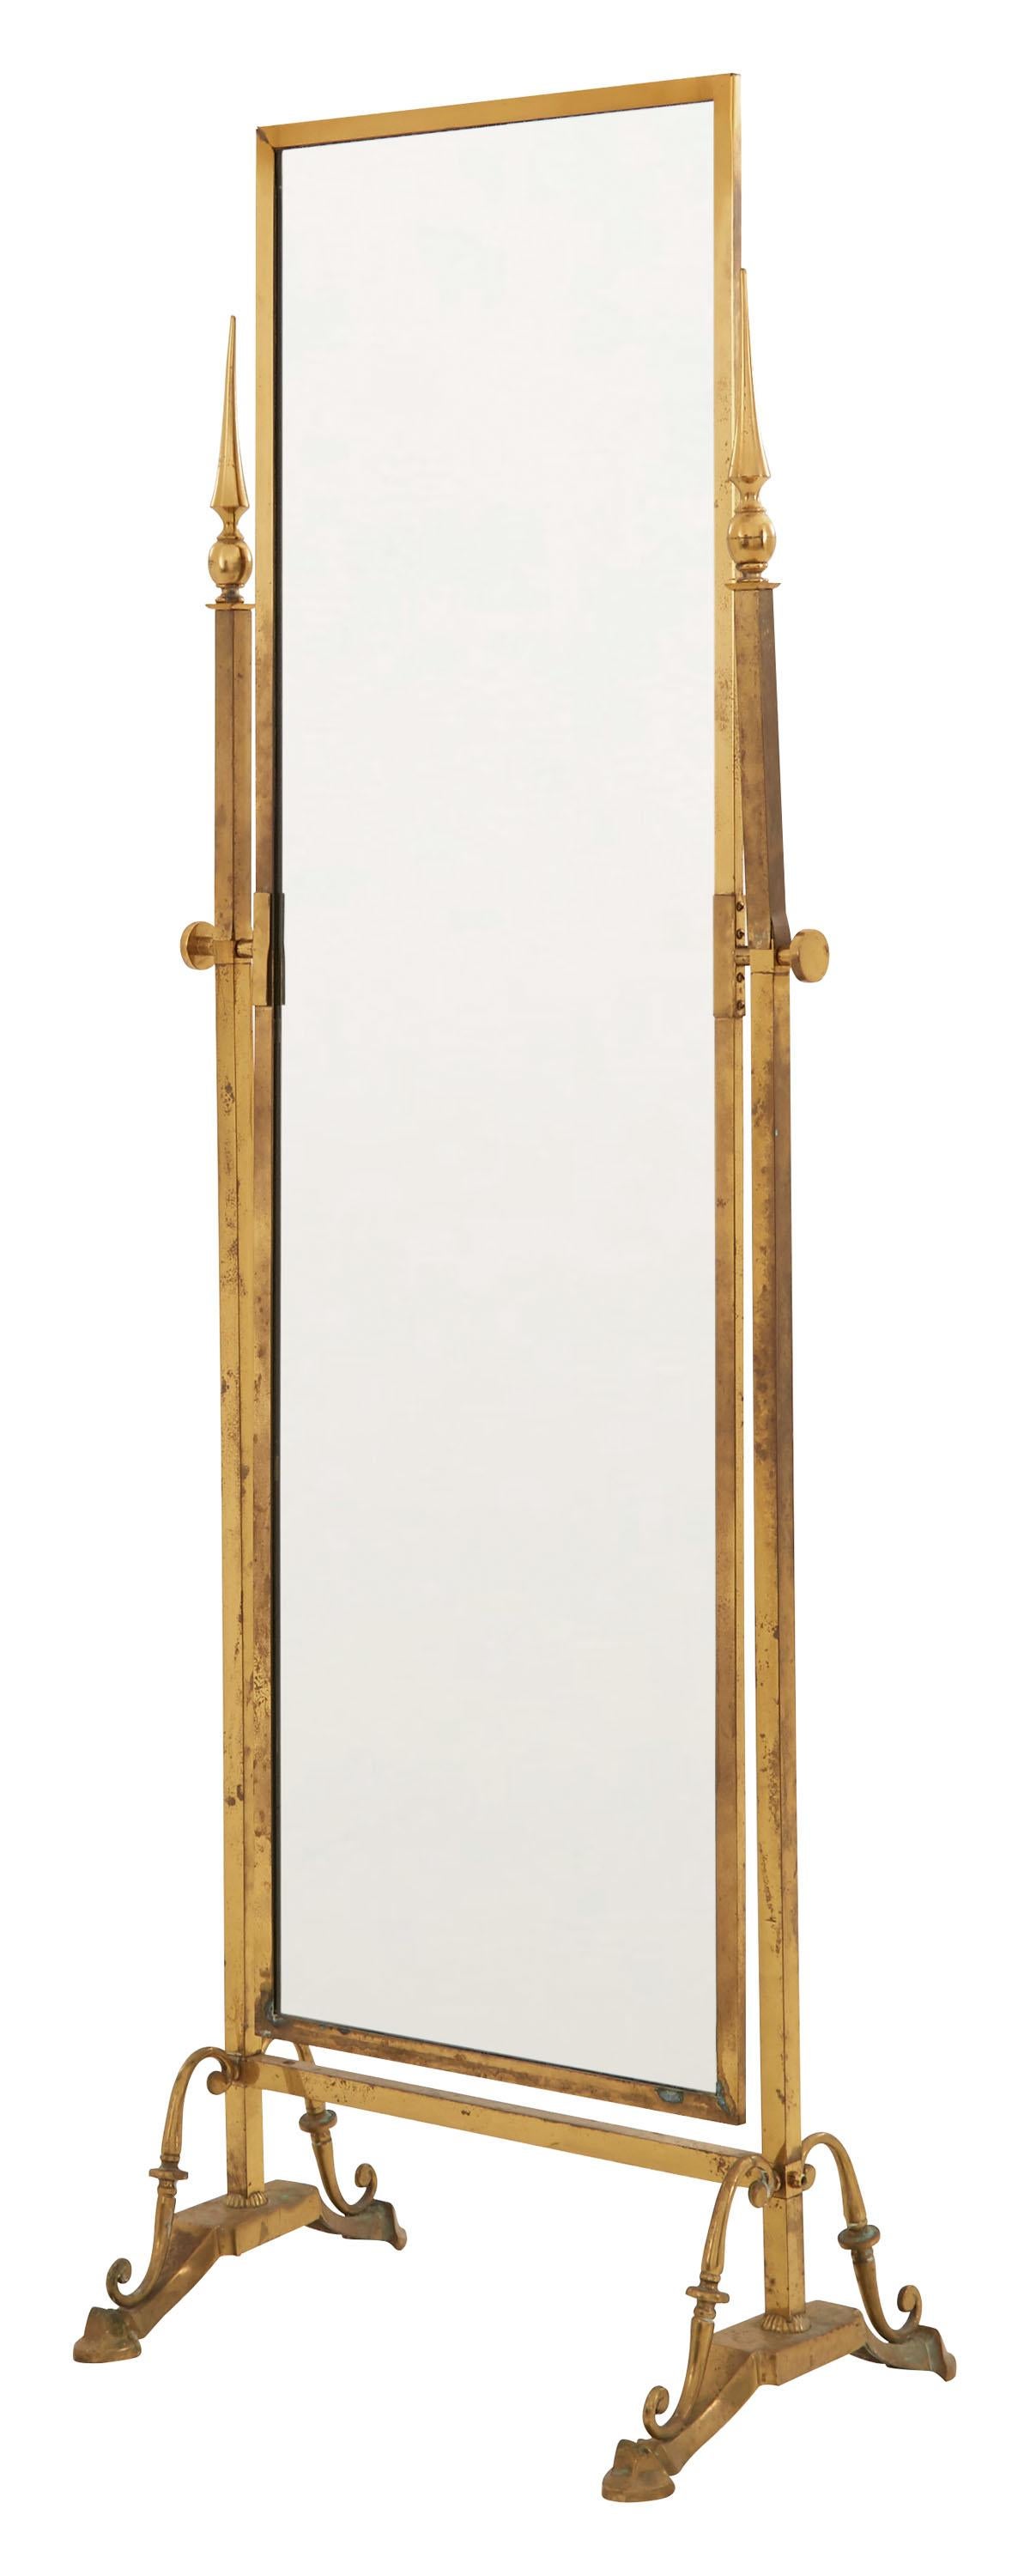 • Patinated brass frame
• New mirror
• Early 20th century
• American

Dimensions:
• Overall: 24